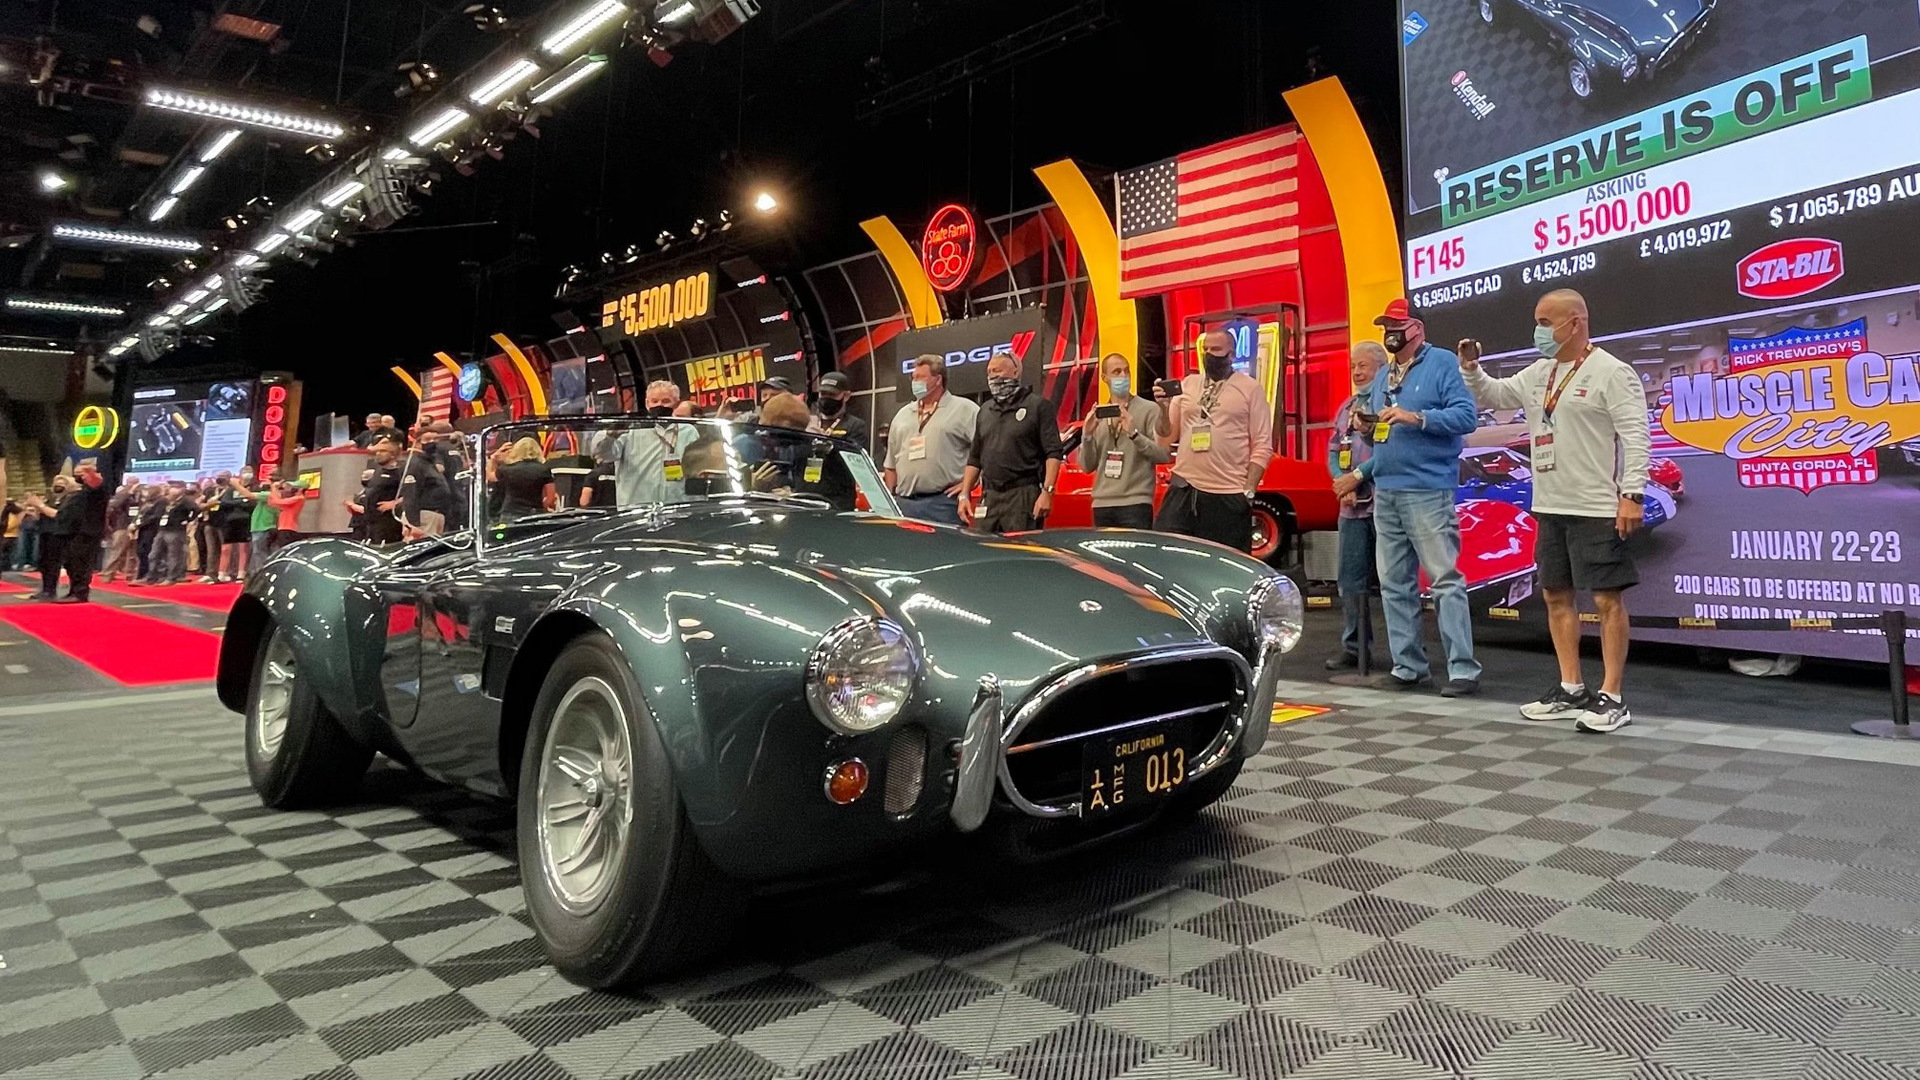 Sale of 1965 Shelby 427 Cobra owned by Carroll Shelby - Photo Credit: Mecum Auctions